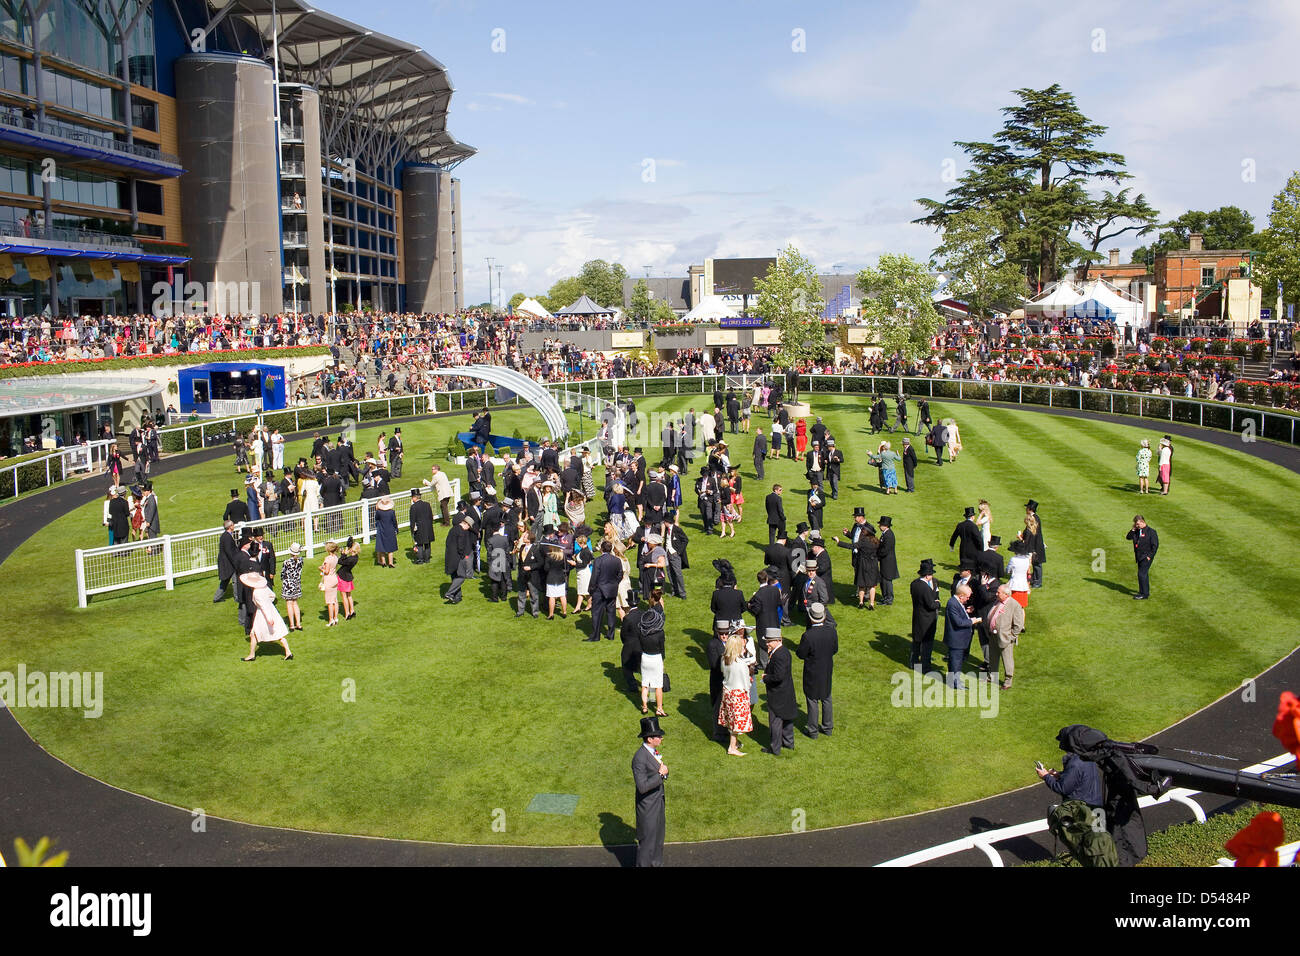 The winners enclosure at Royal Ascot racecourse. Stock Photo